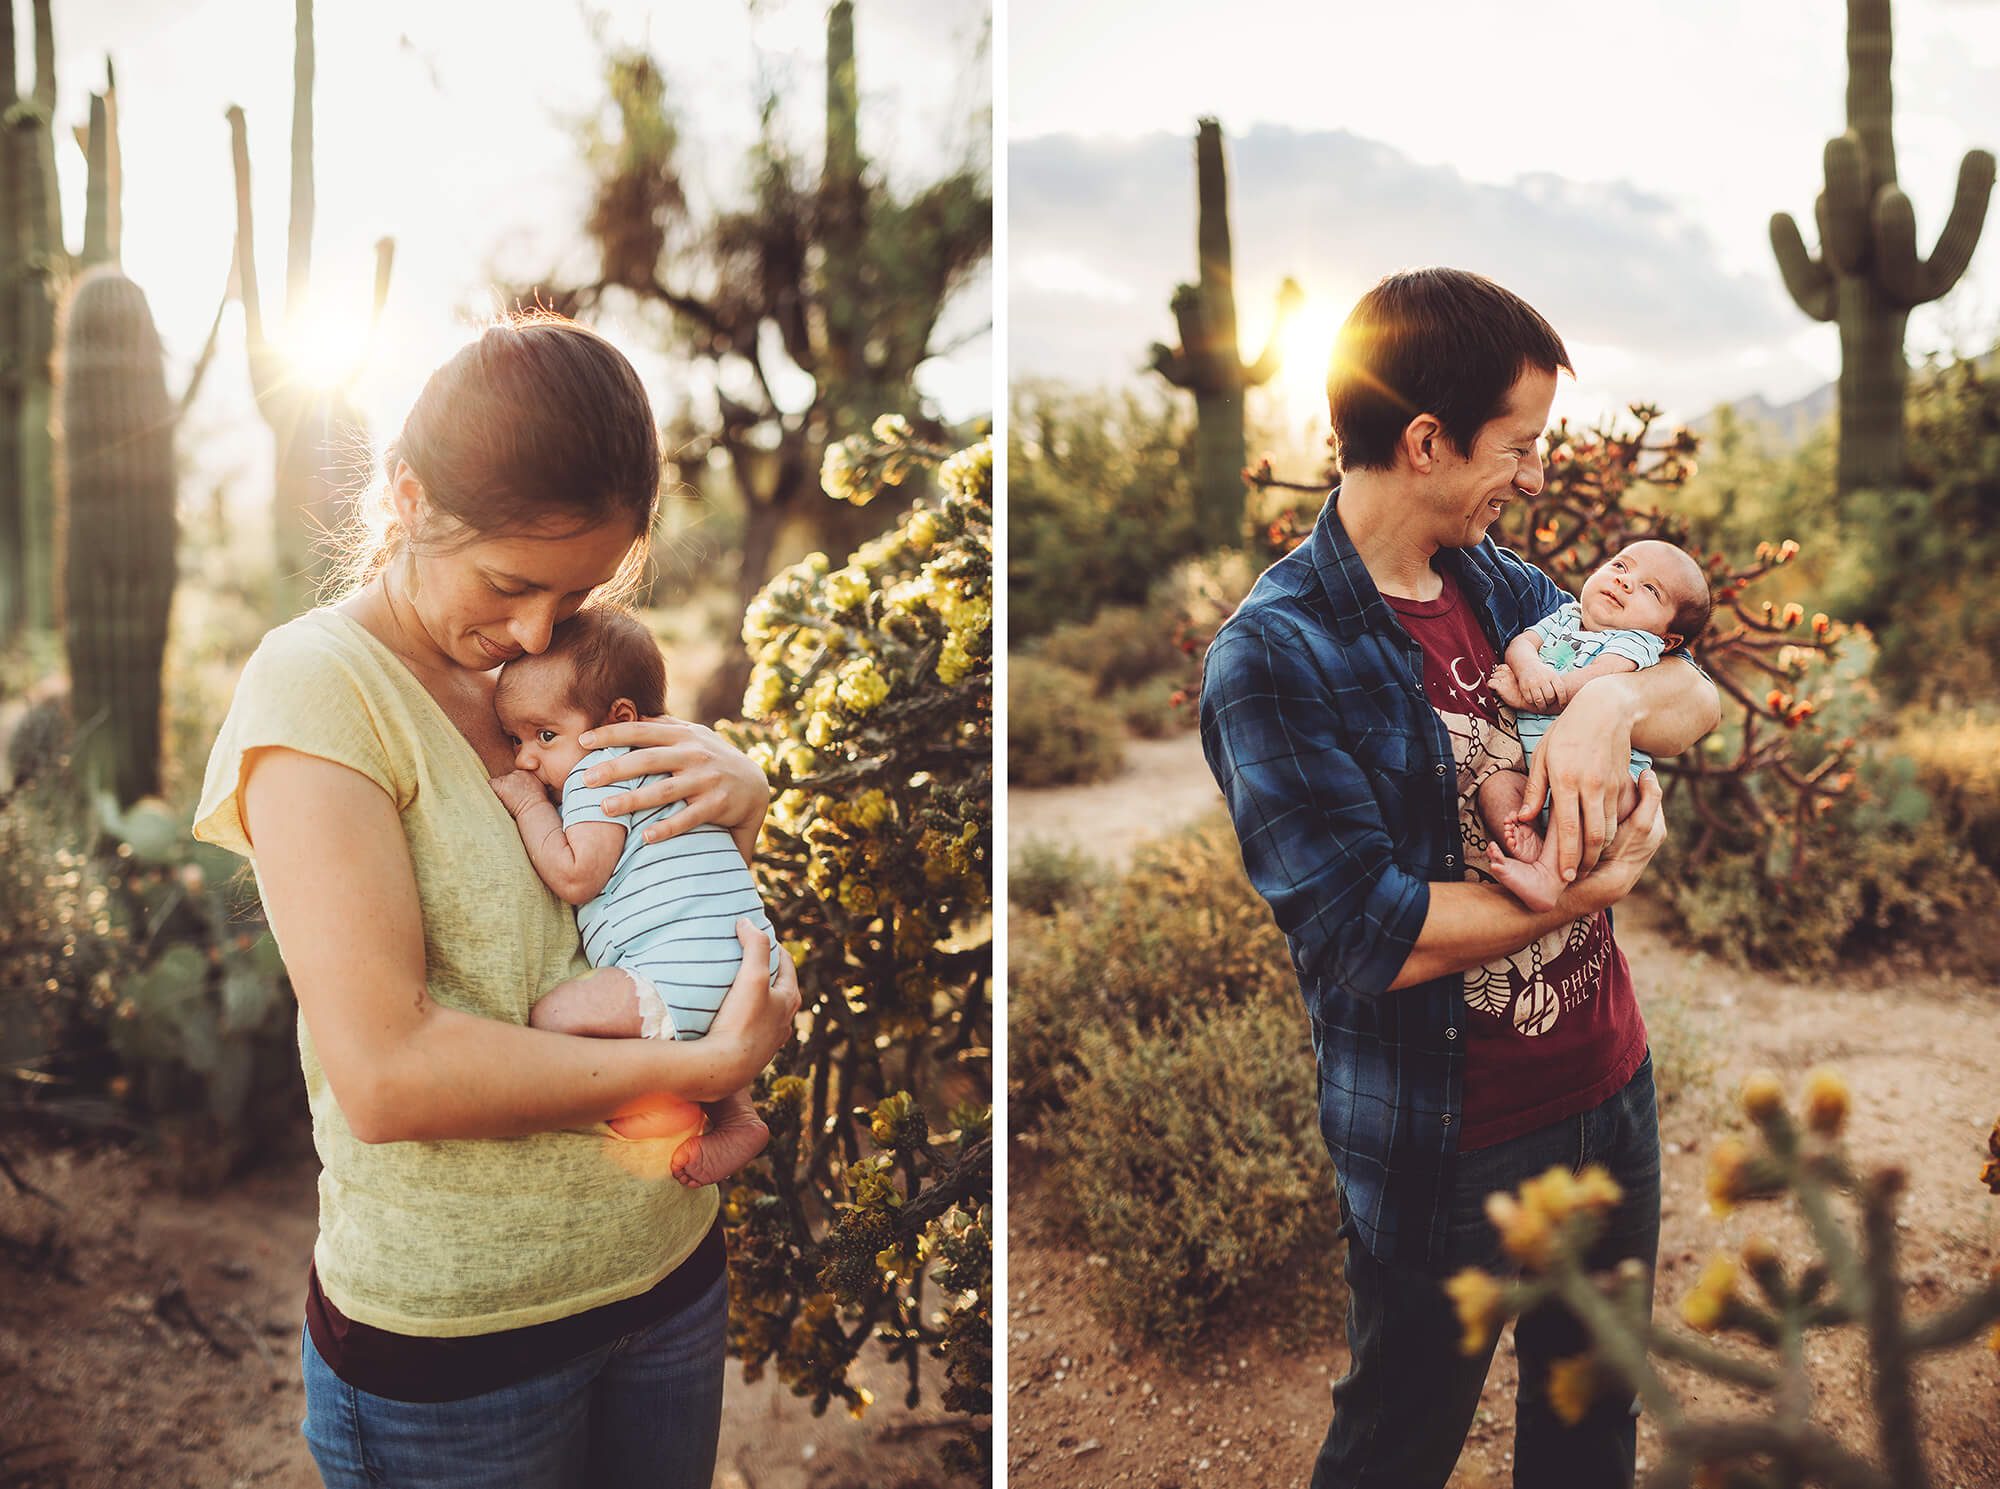 Mom and dad hold their baby boy close during their family session at Sabino Canyon.